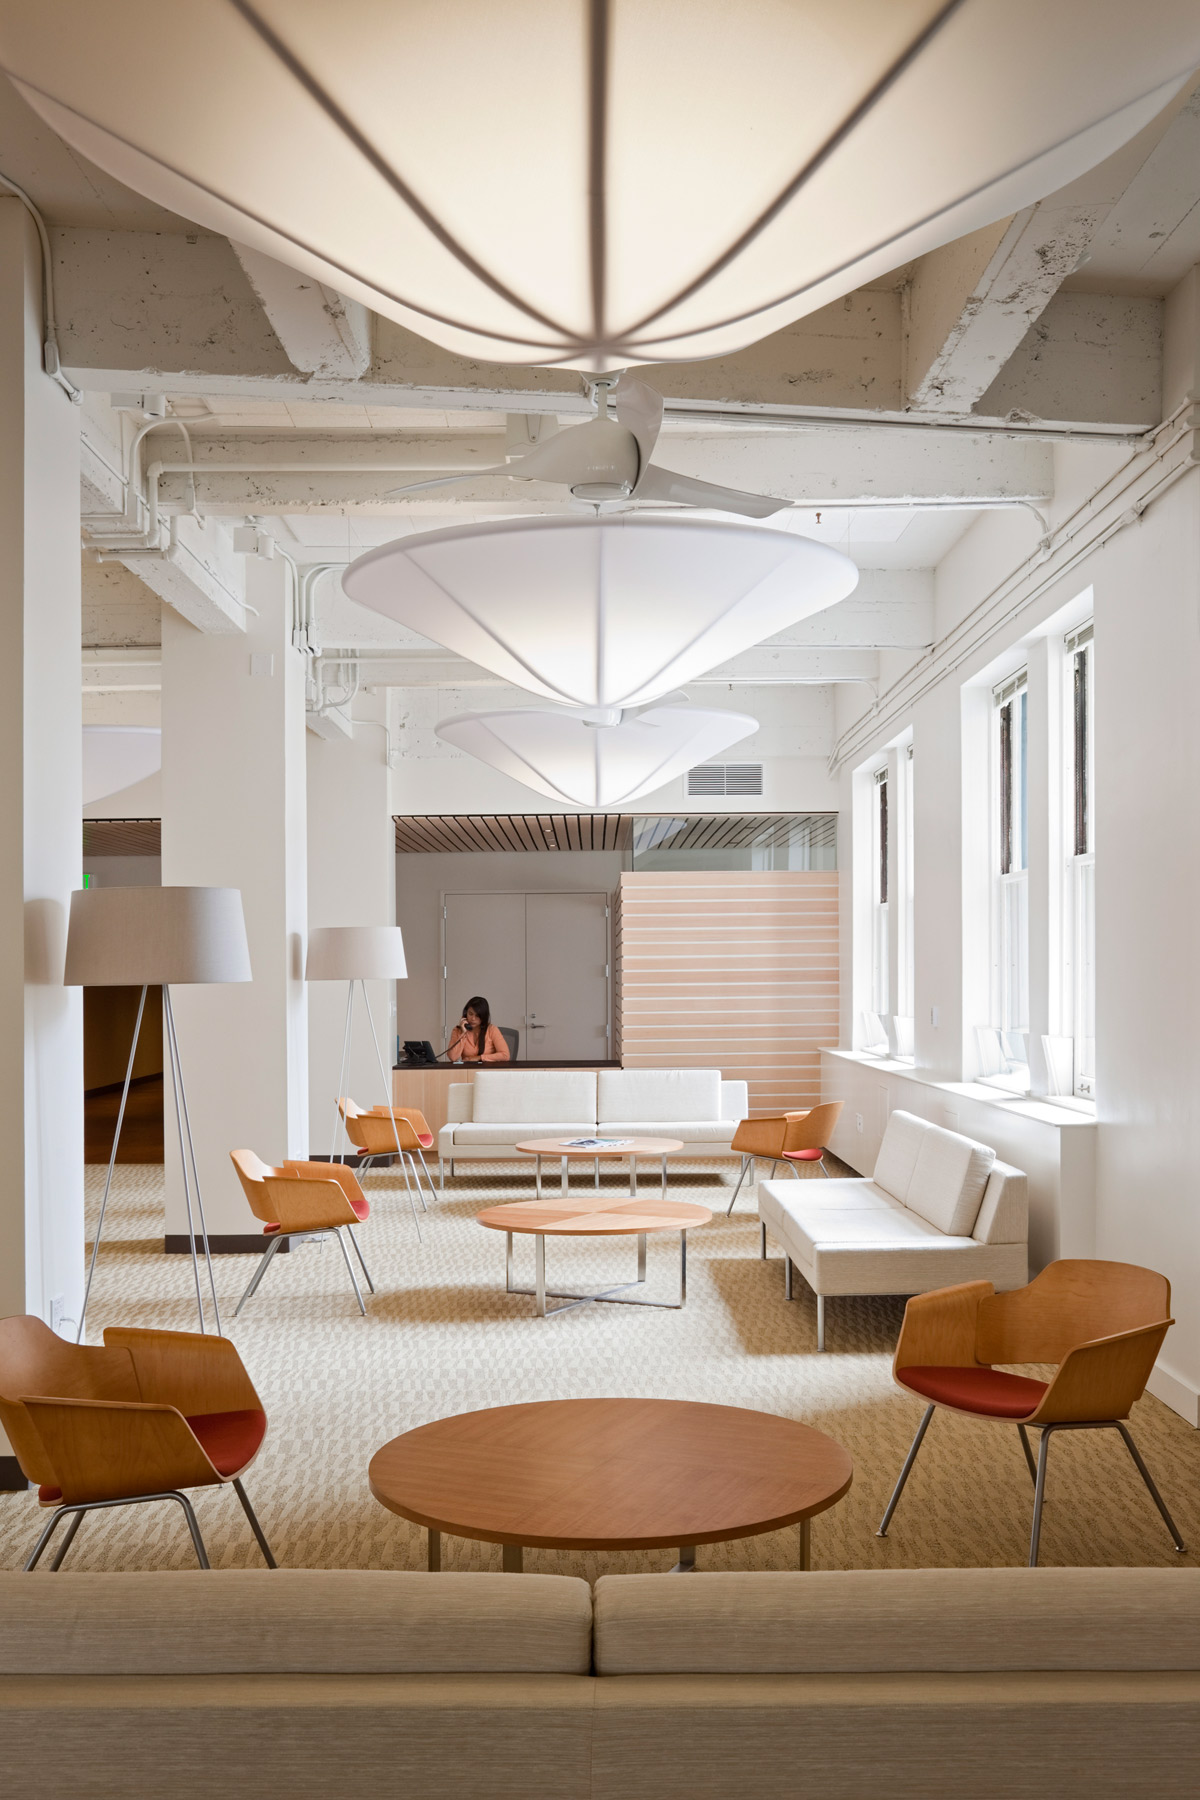 The highly sustainable, LEED Platinum-rated ClimateWorks Foundation office space weaves together advanced energy-efficiency and carbon reduction within inviting spaces that connect staff and visitors to each other and the natural world.